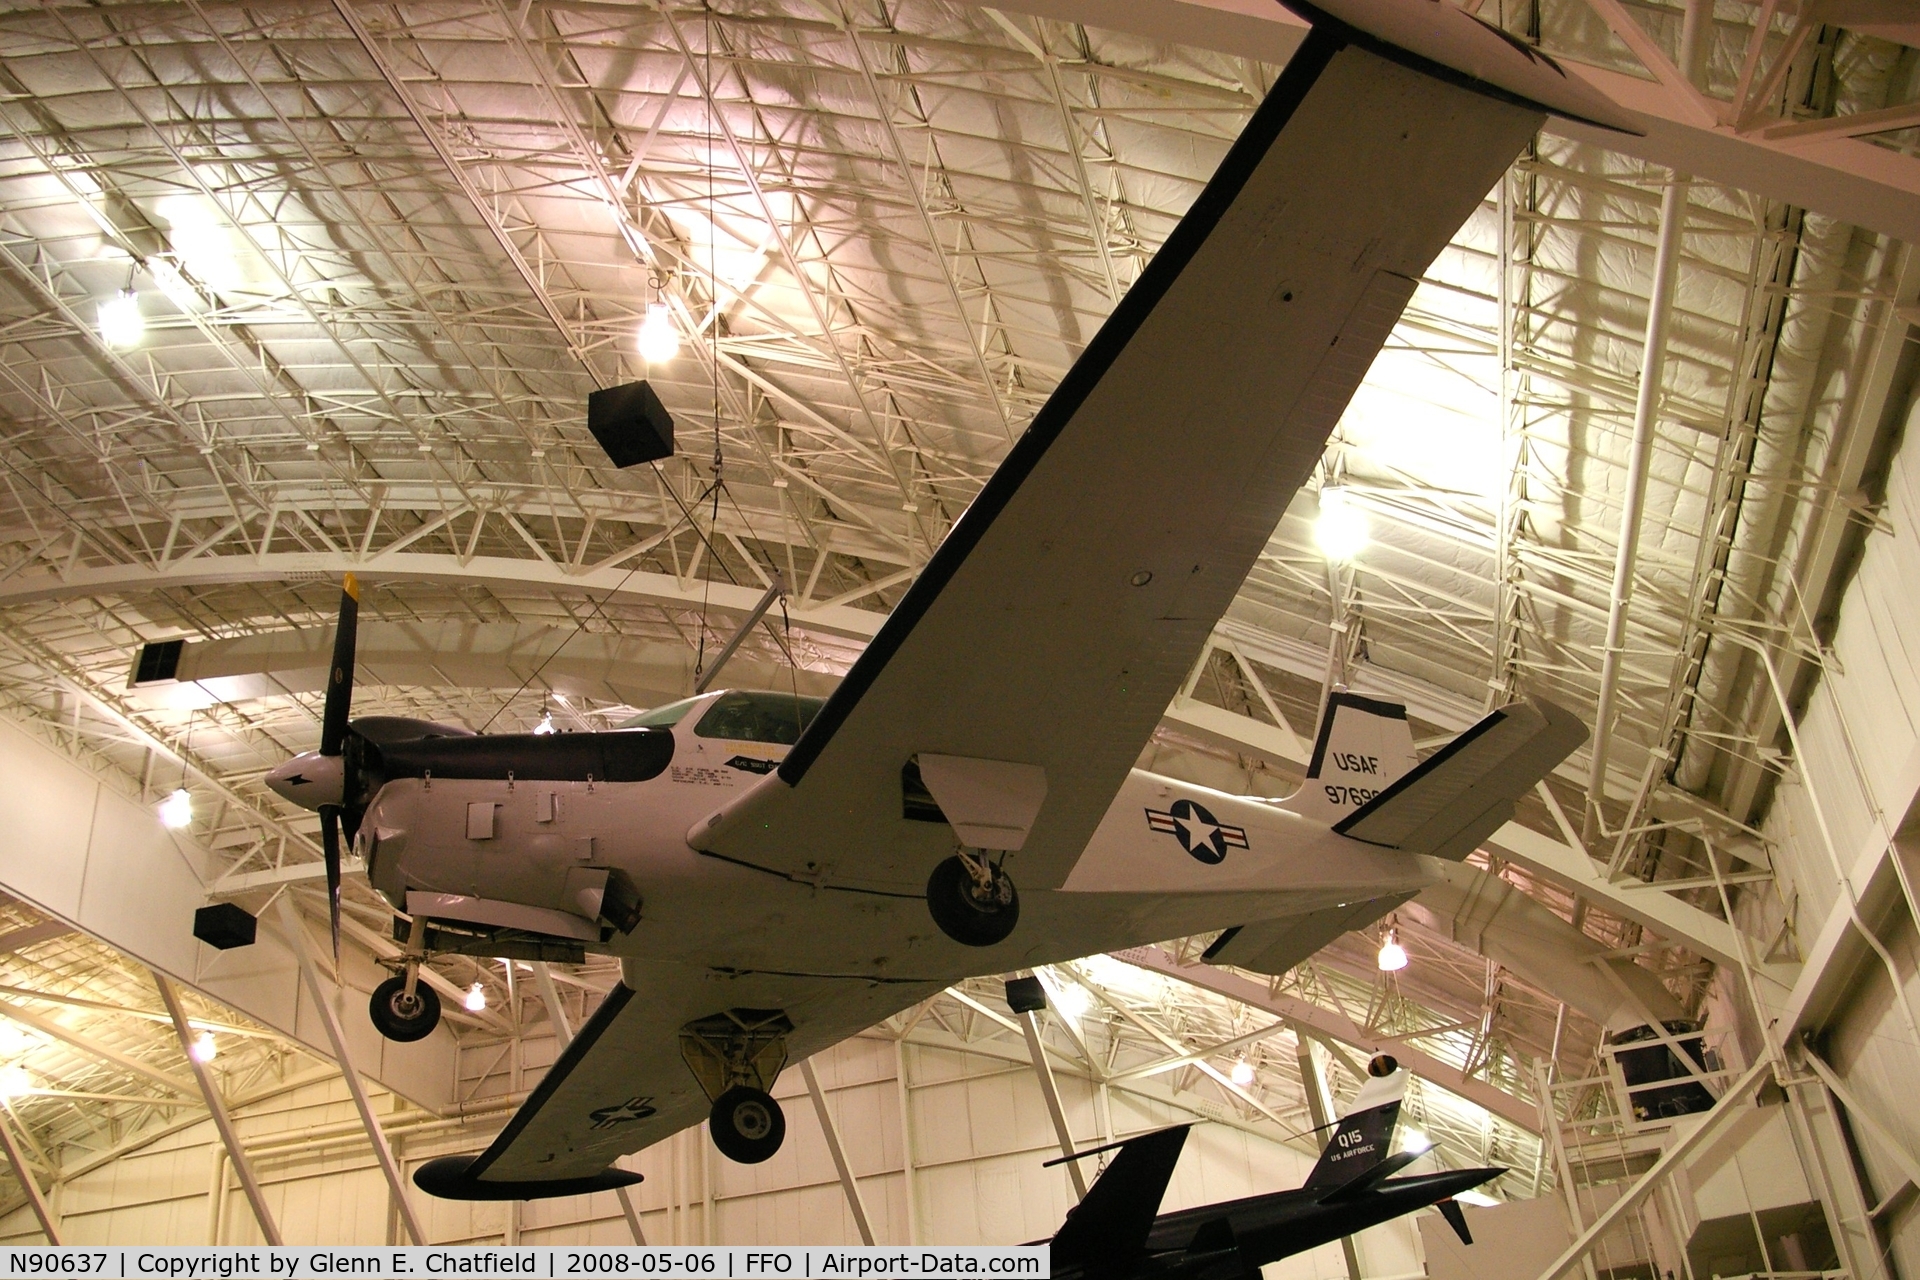 N90637, 1969 Beech QU-22B C/N EB-7 (69-7699), Hanging from the ceiling in the National Museum of the U.S. Air Force